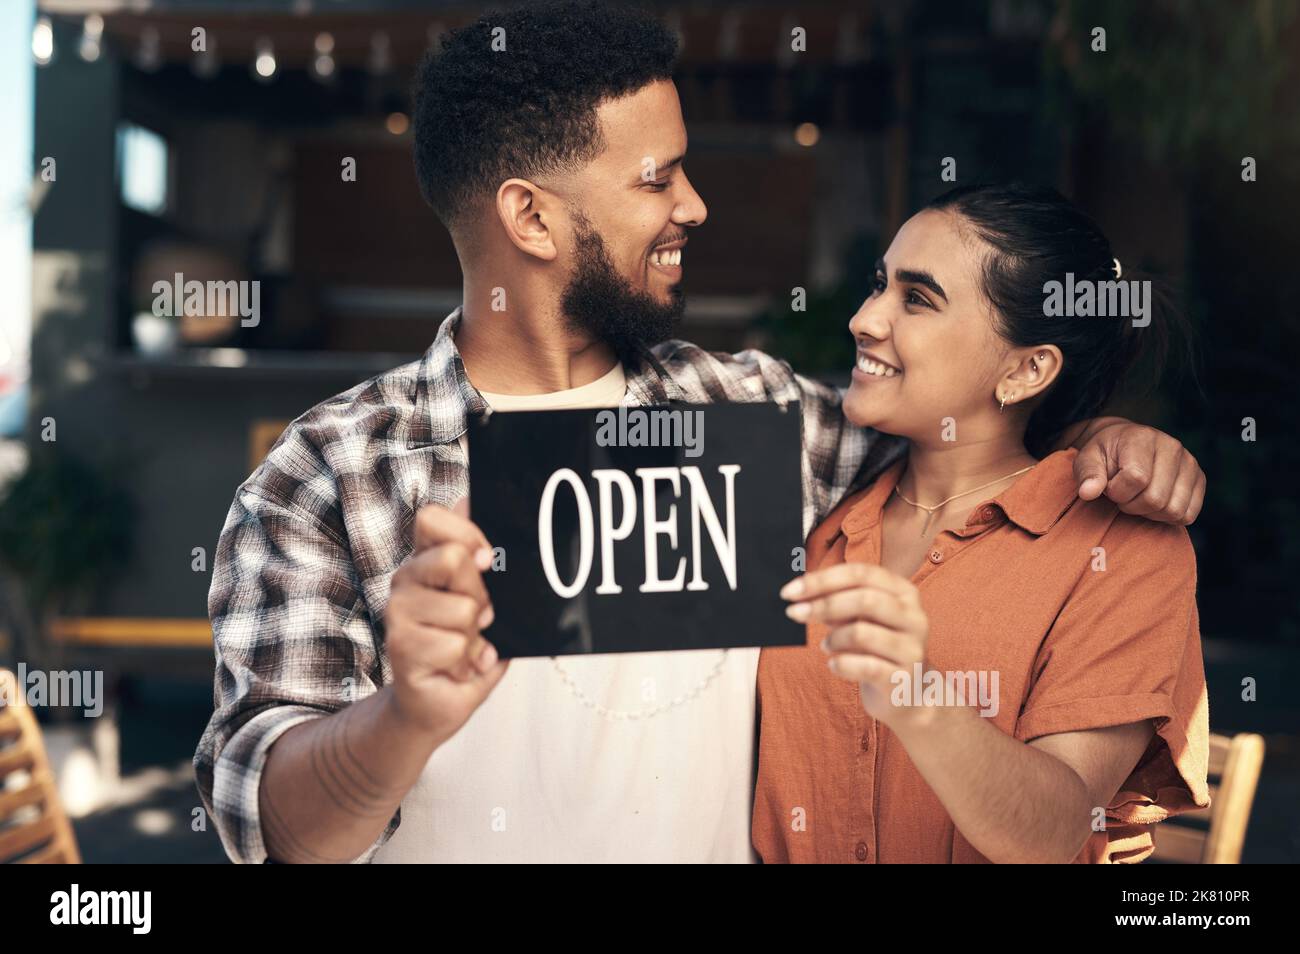 We did it. two young restaurant owners standing outside together and holding an open sign. Stock Photo